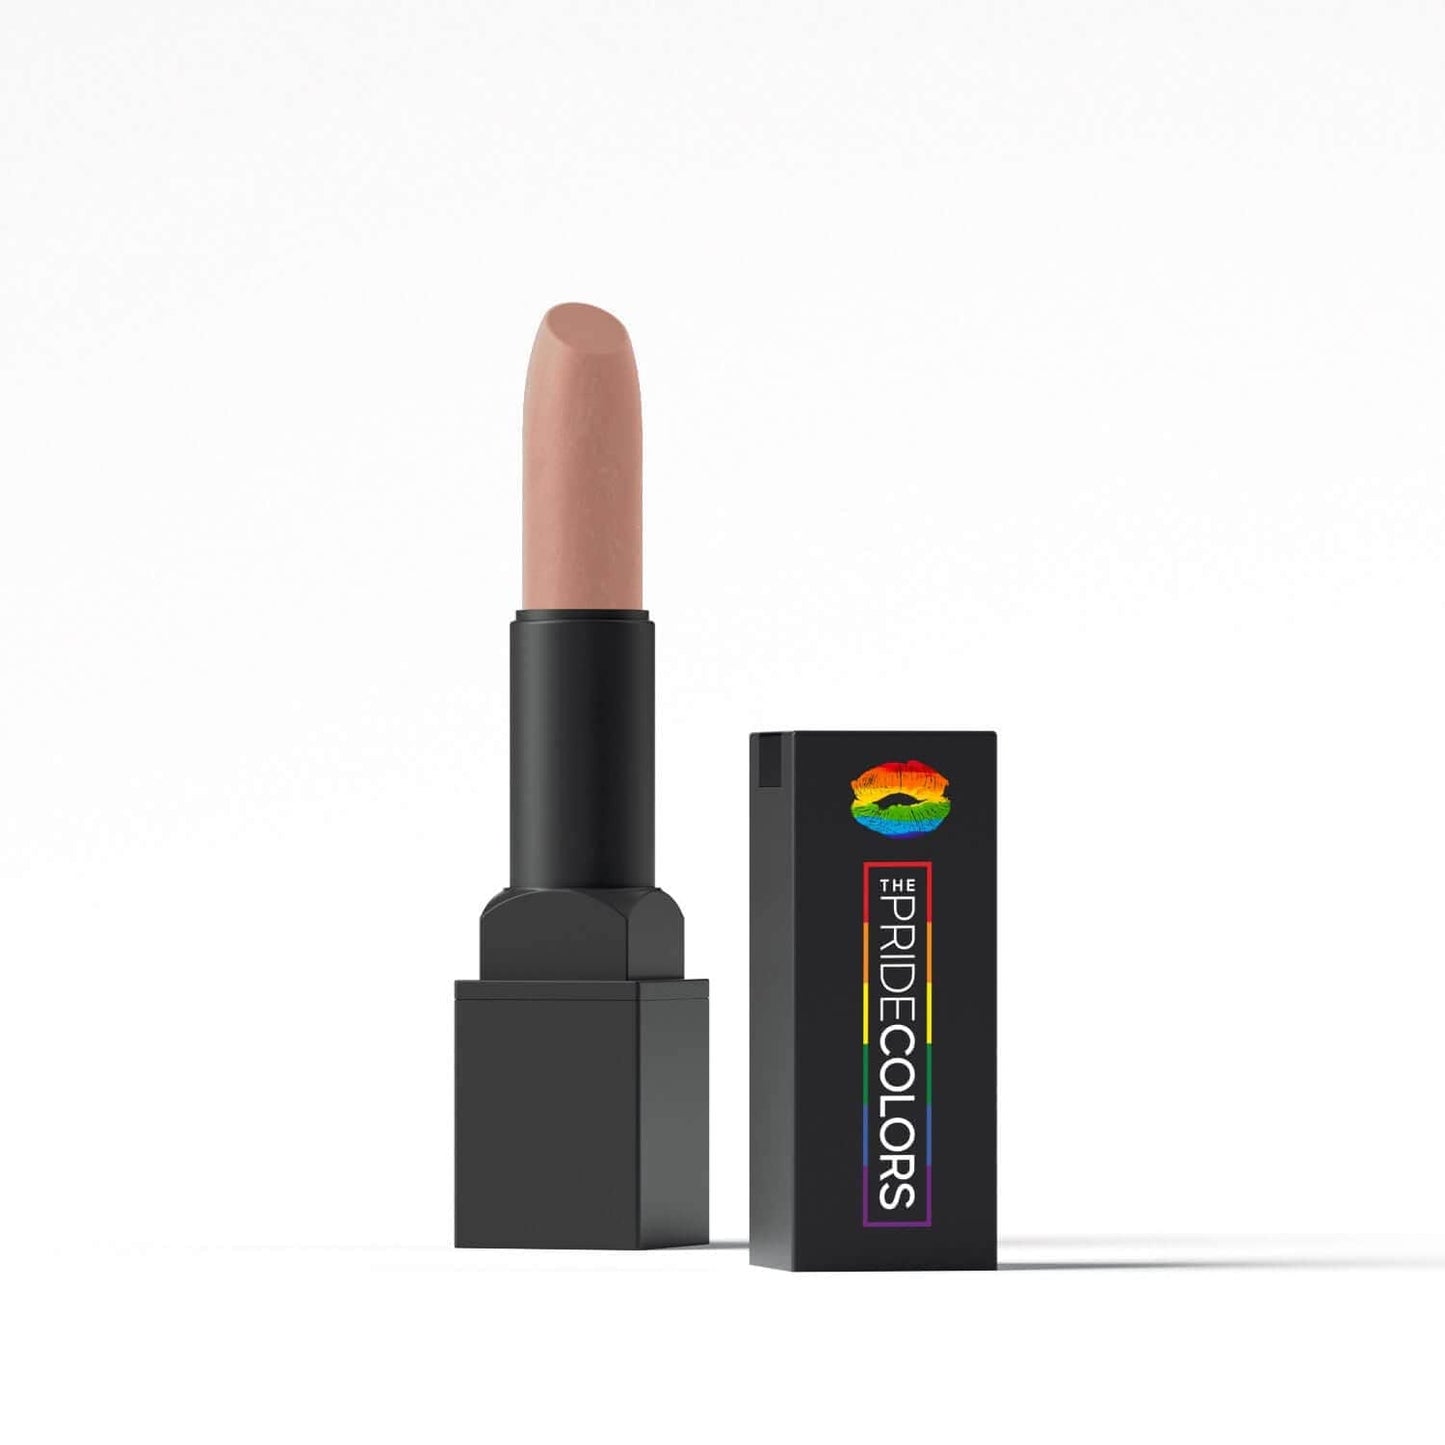 Mocha Latte Lipstick | Cream-Silky Lipstick by ThePrideColors Biodegradable Ingredients, Cruelty-free, Gluten-free, Made in Canada, Made with minerals, Natural formula, Paraben-free, Sulfate-free lipstick thepridecolors